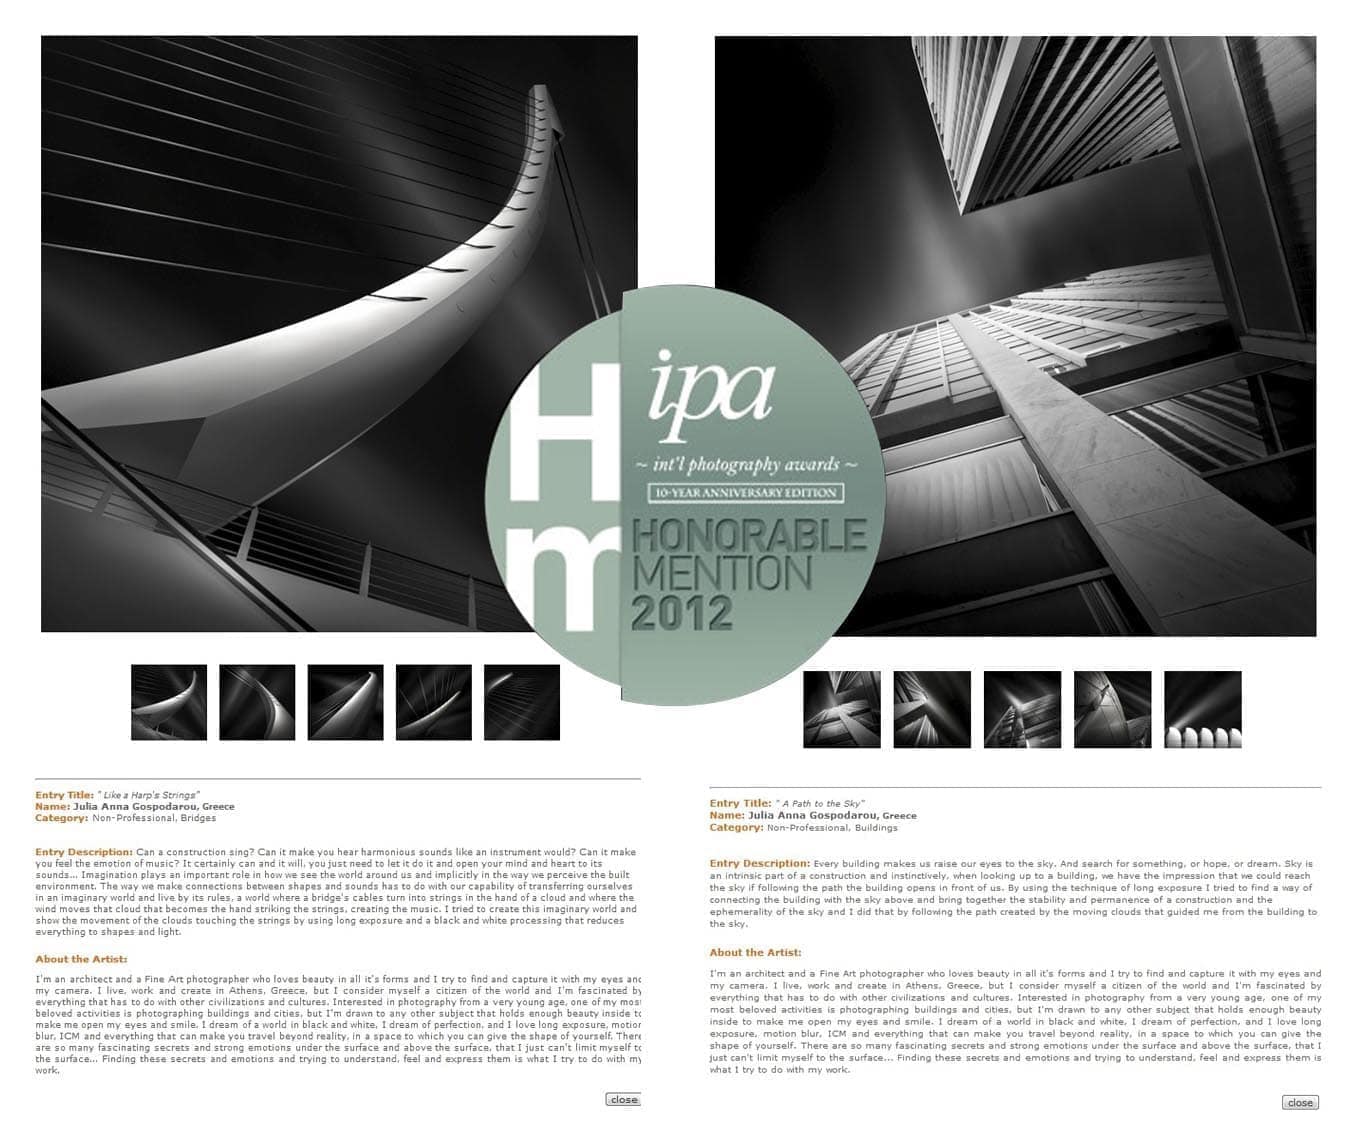 IPA 2012 - International Photography Awards - Honorable Mentions for Architecture - Categories Bridges and Buildings